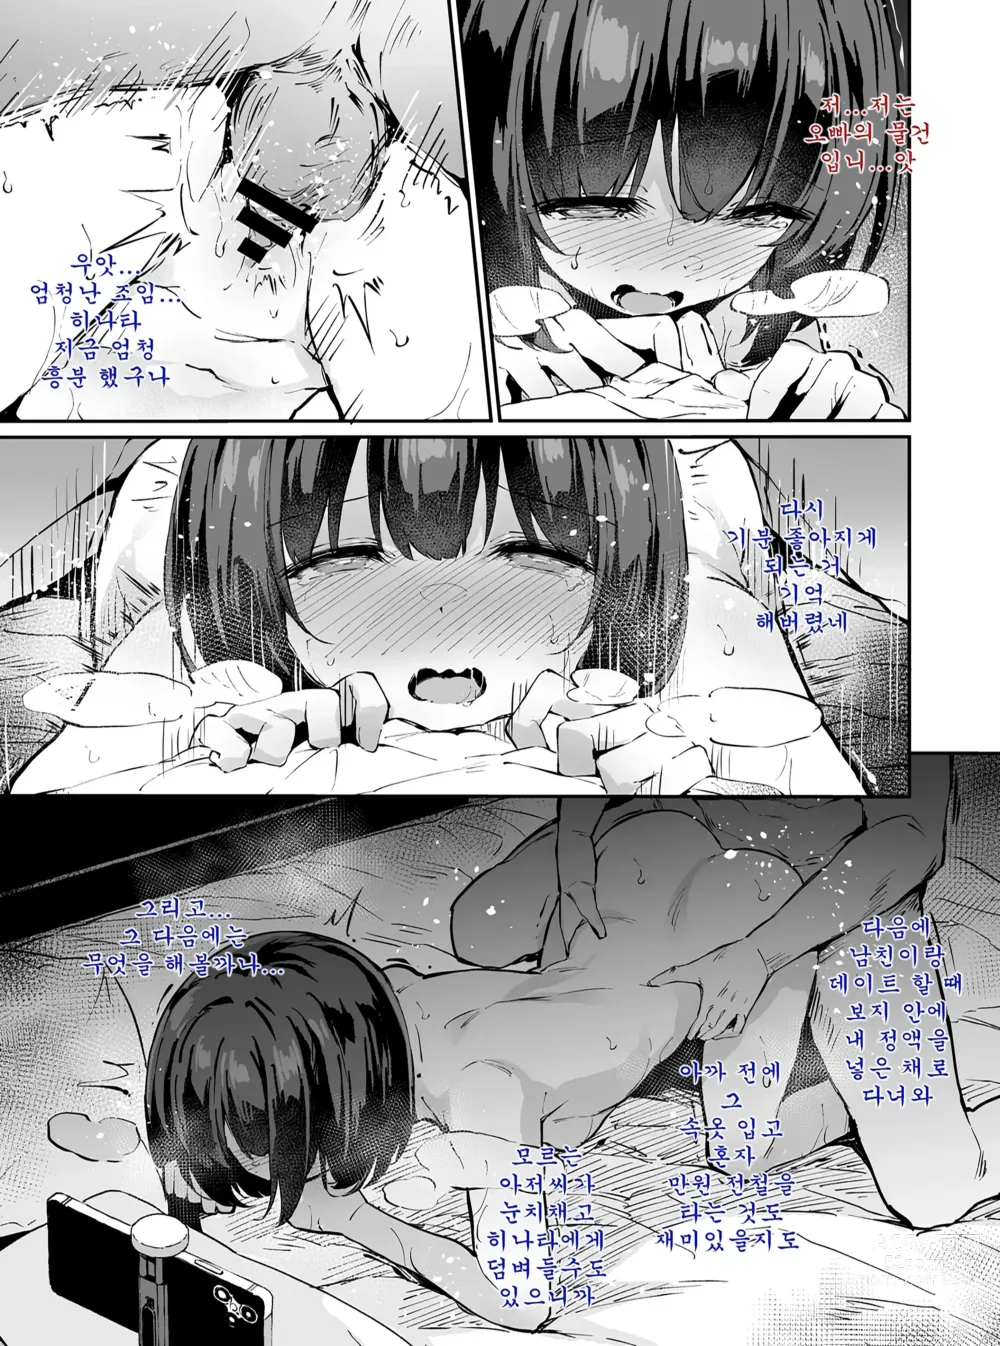 Page 4 of doujinshi 비밀스런 음행 After